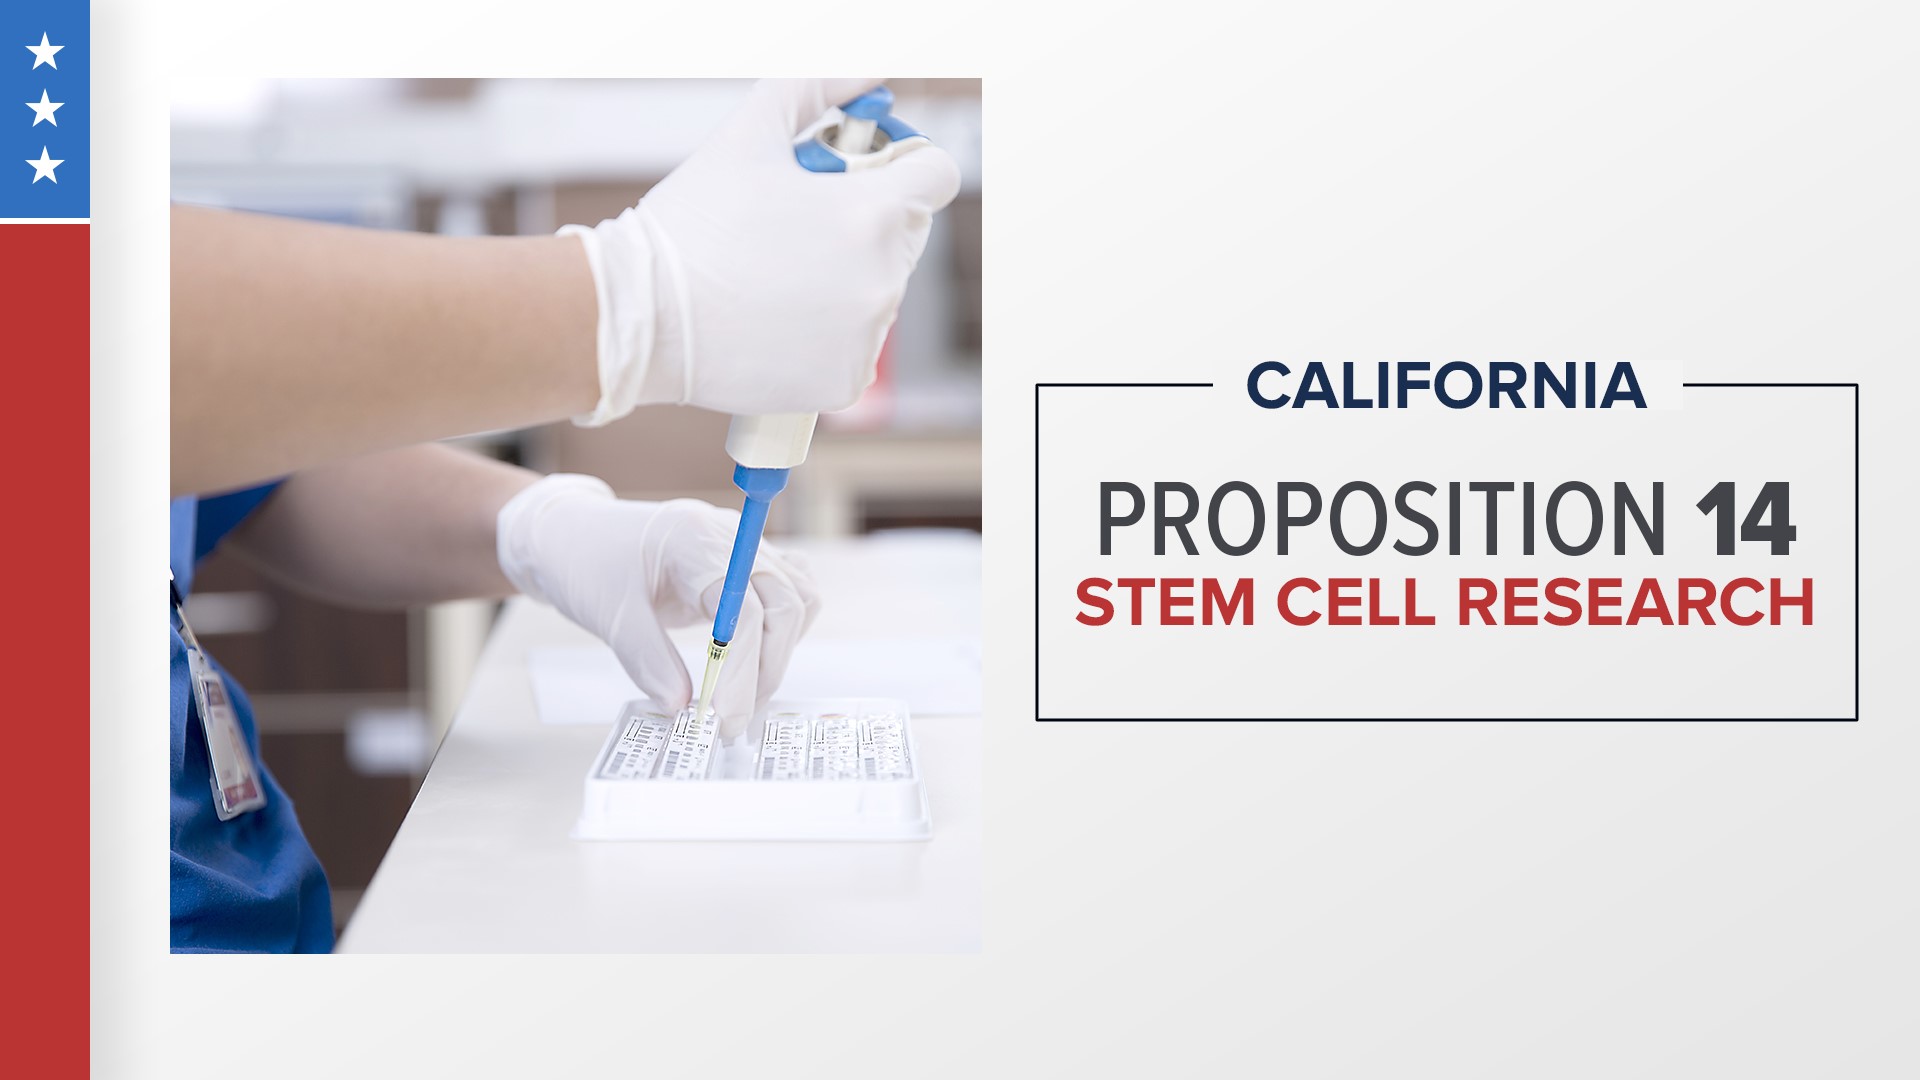 Proposition 14 is on the ballot to continue funding stem cell research by borrowing up to $5.5 billion through bonds.